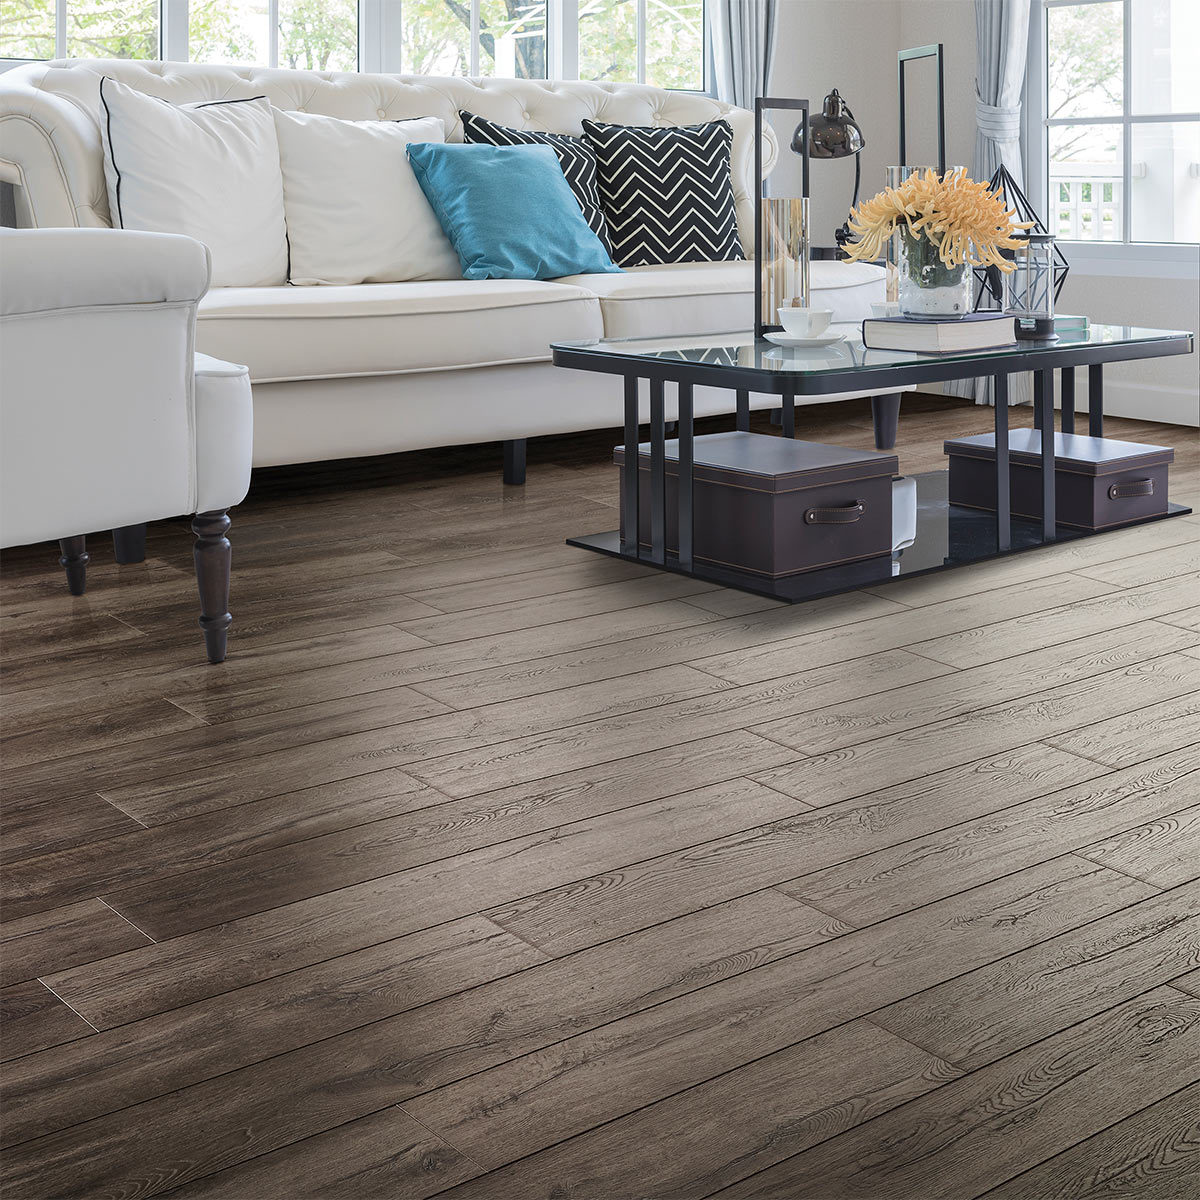 Golden Select Silverwood Silver Birch Laminate Flooring With